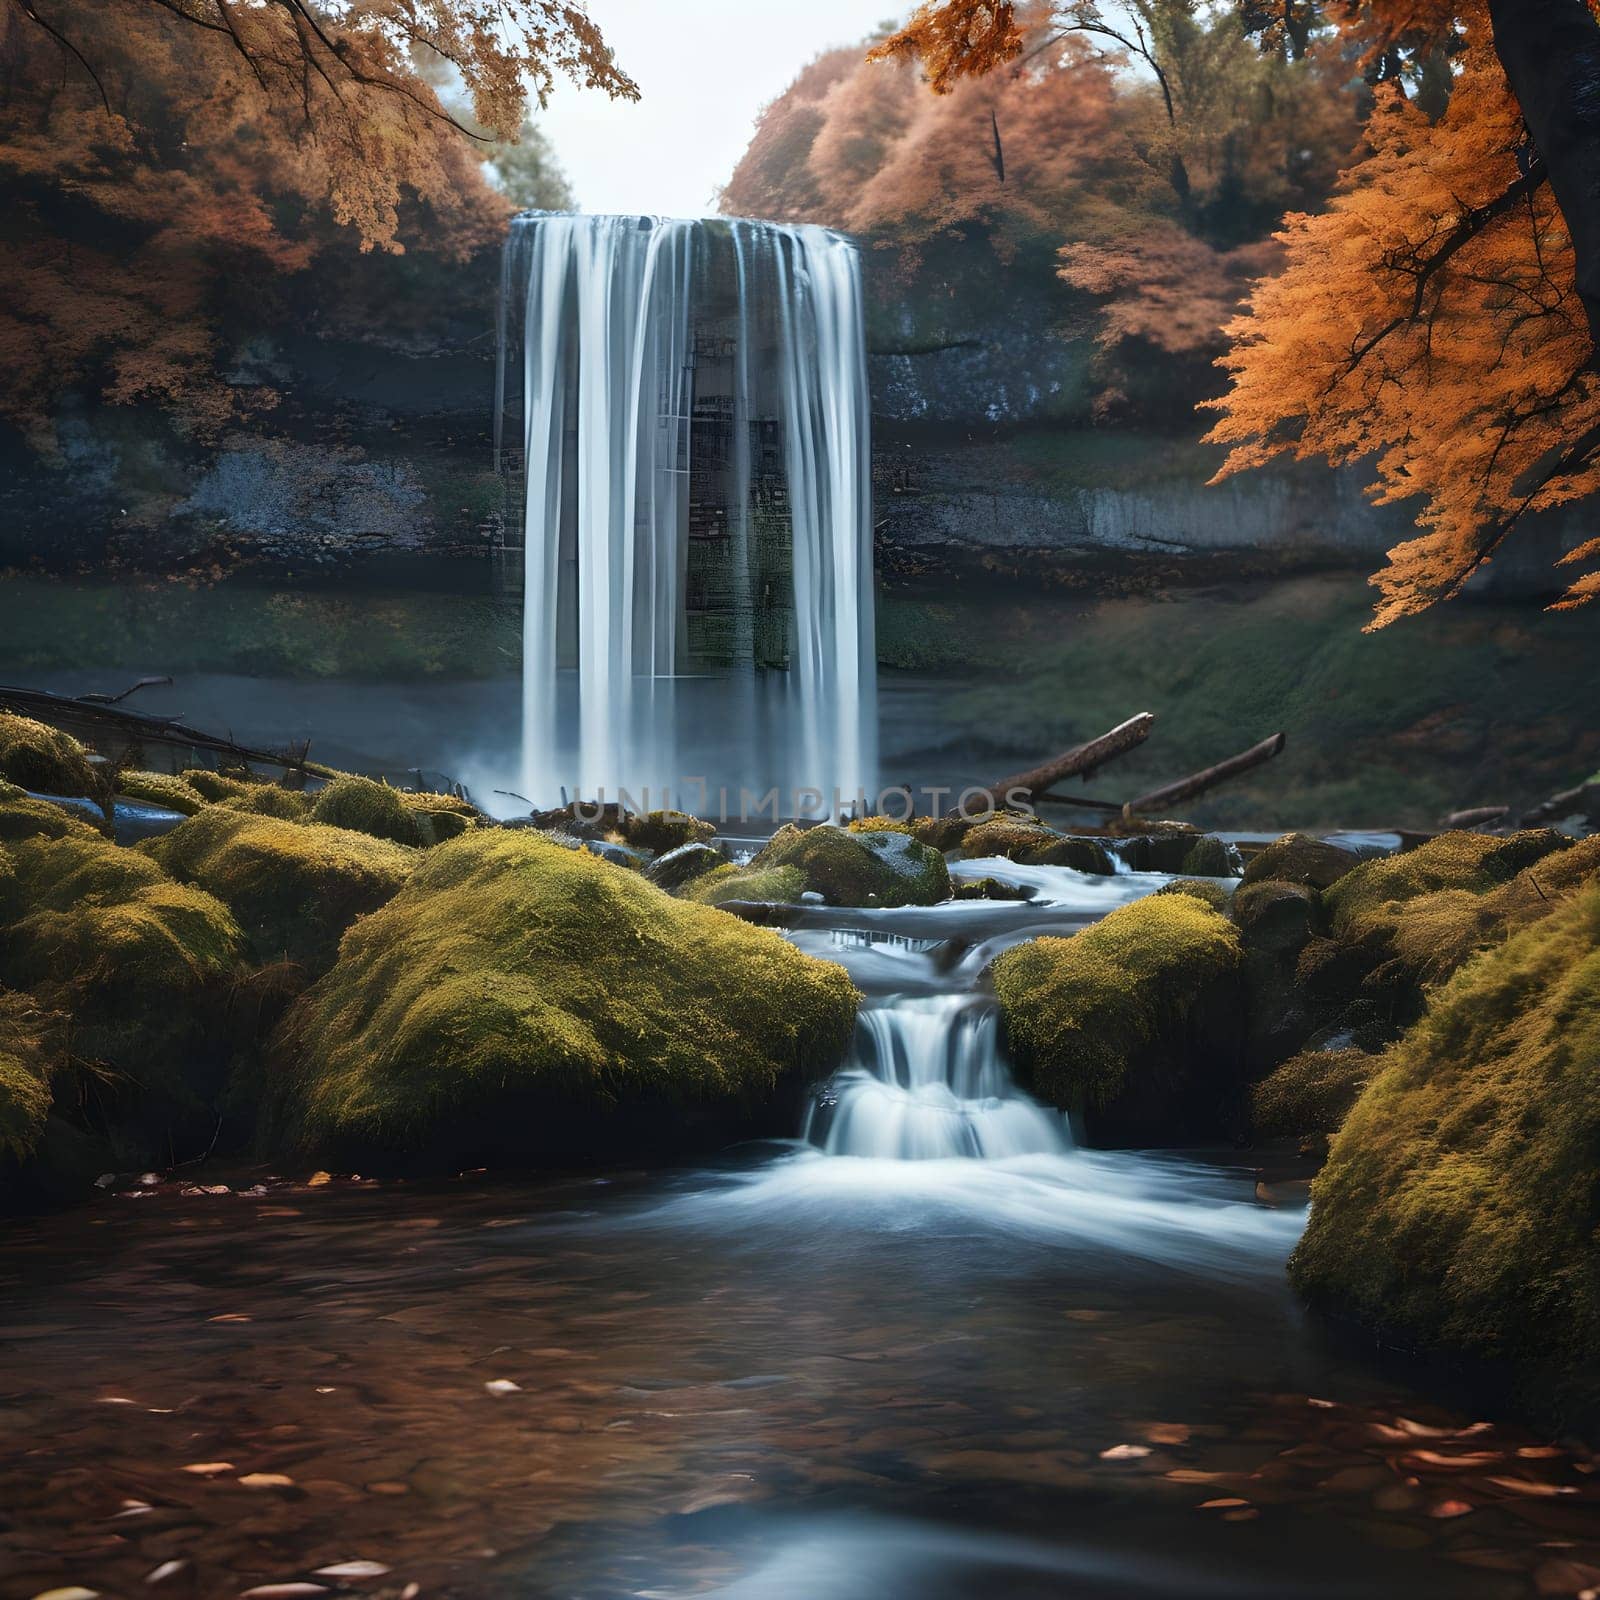 Autumn's Symphony: Capturing the Cascade of Colors in Nature's Waterfall by Petrichor